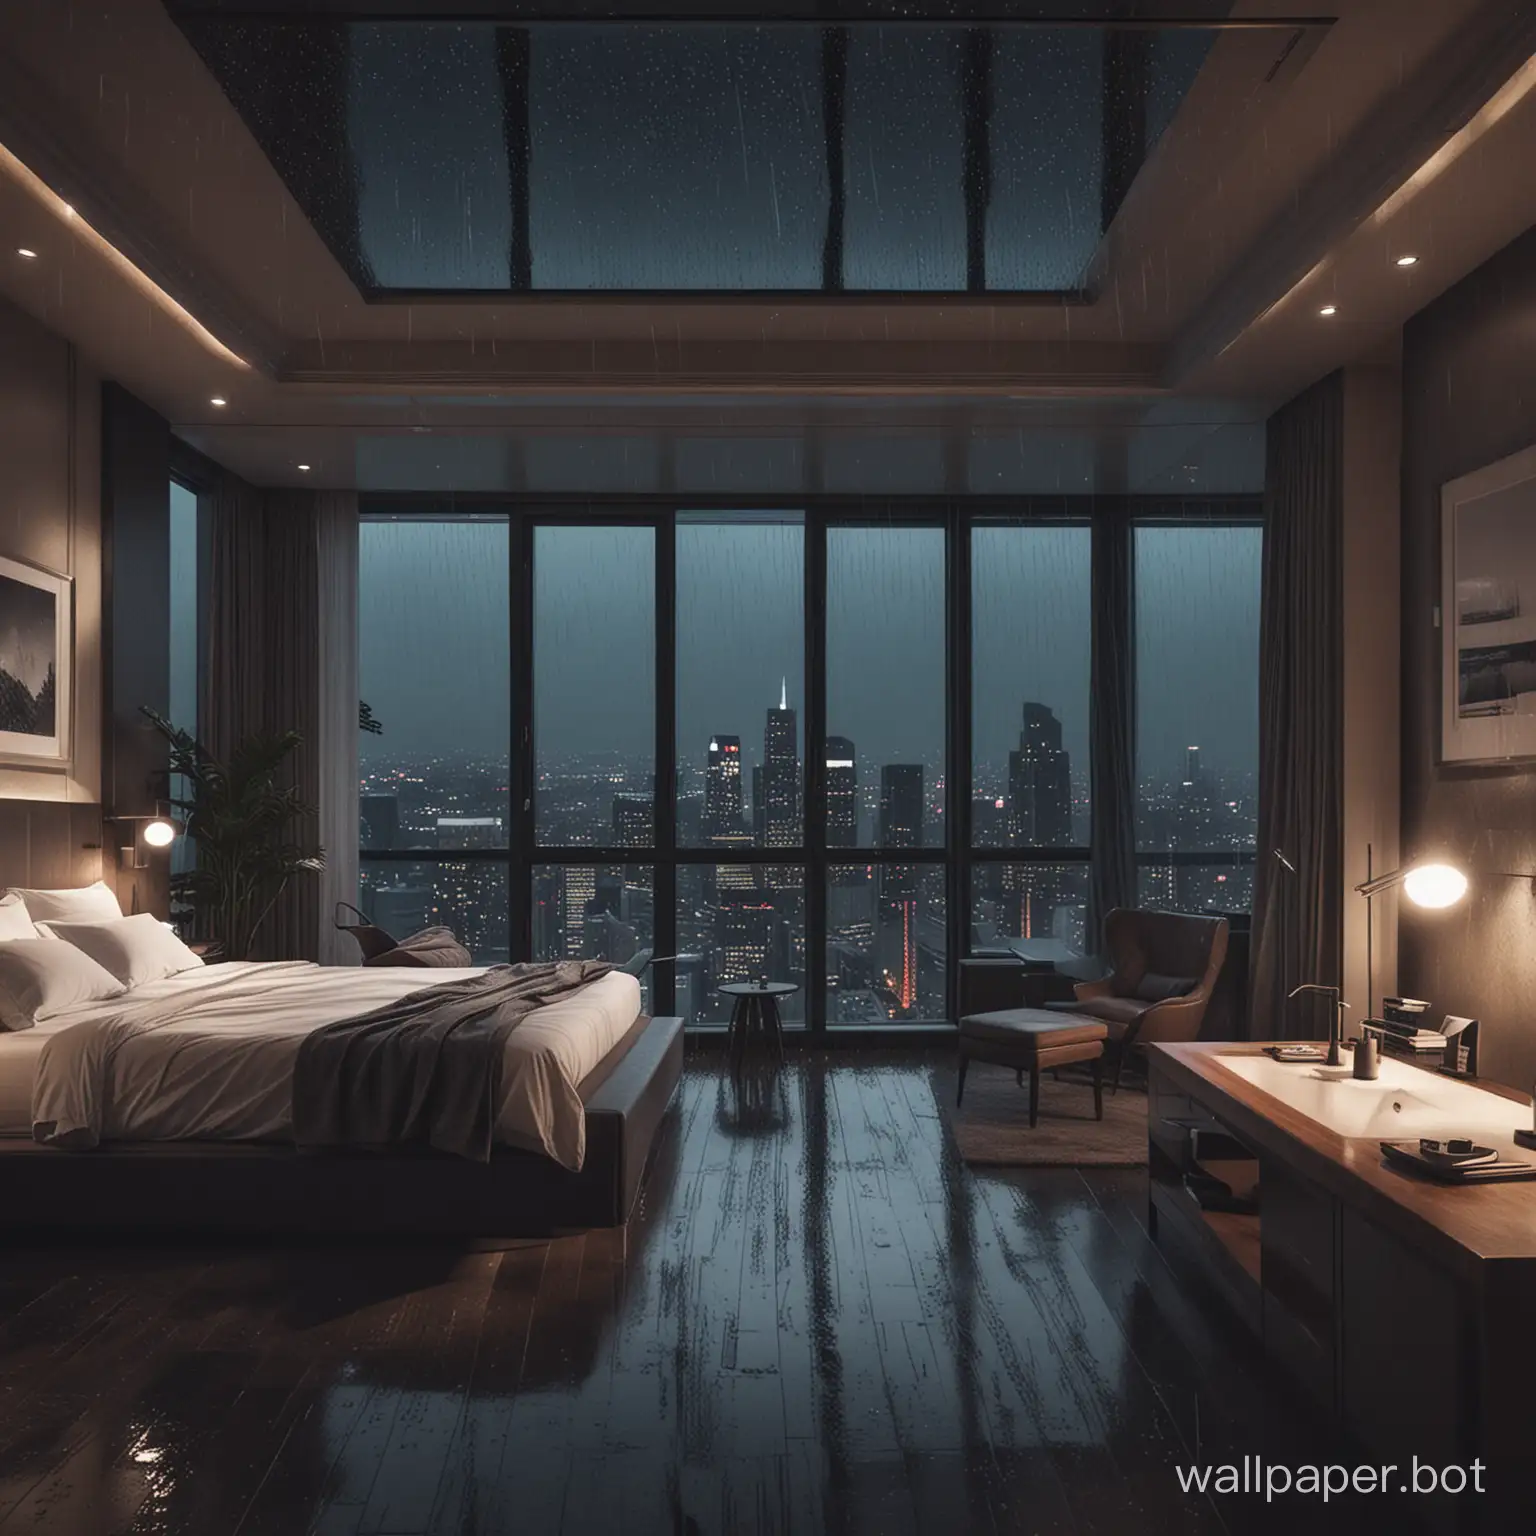 Cozy-Evening-in-a-Penthouse-Suite-Bedroom-on-a-Rainy-Night